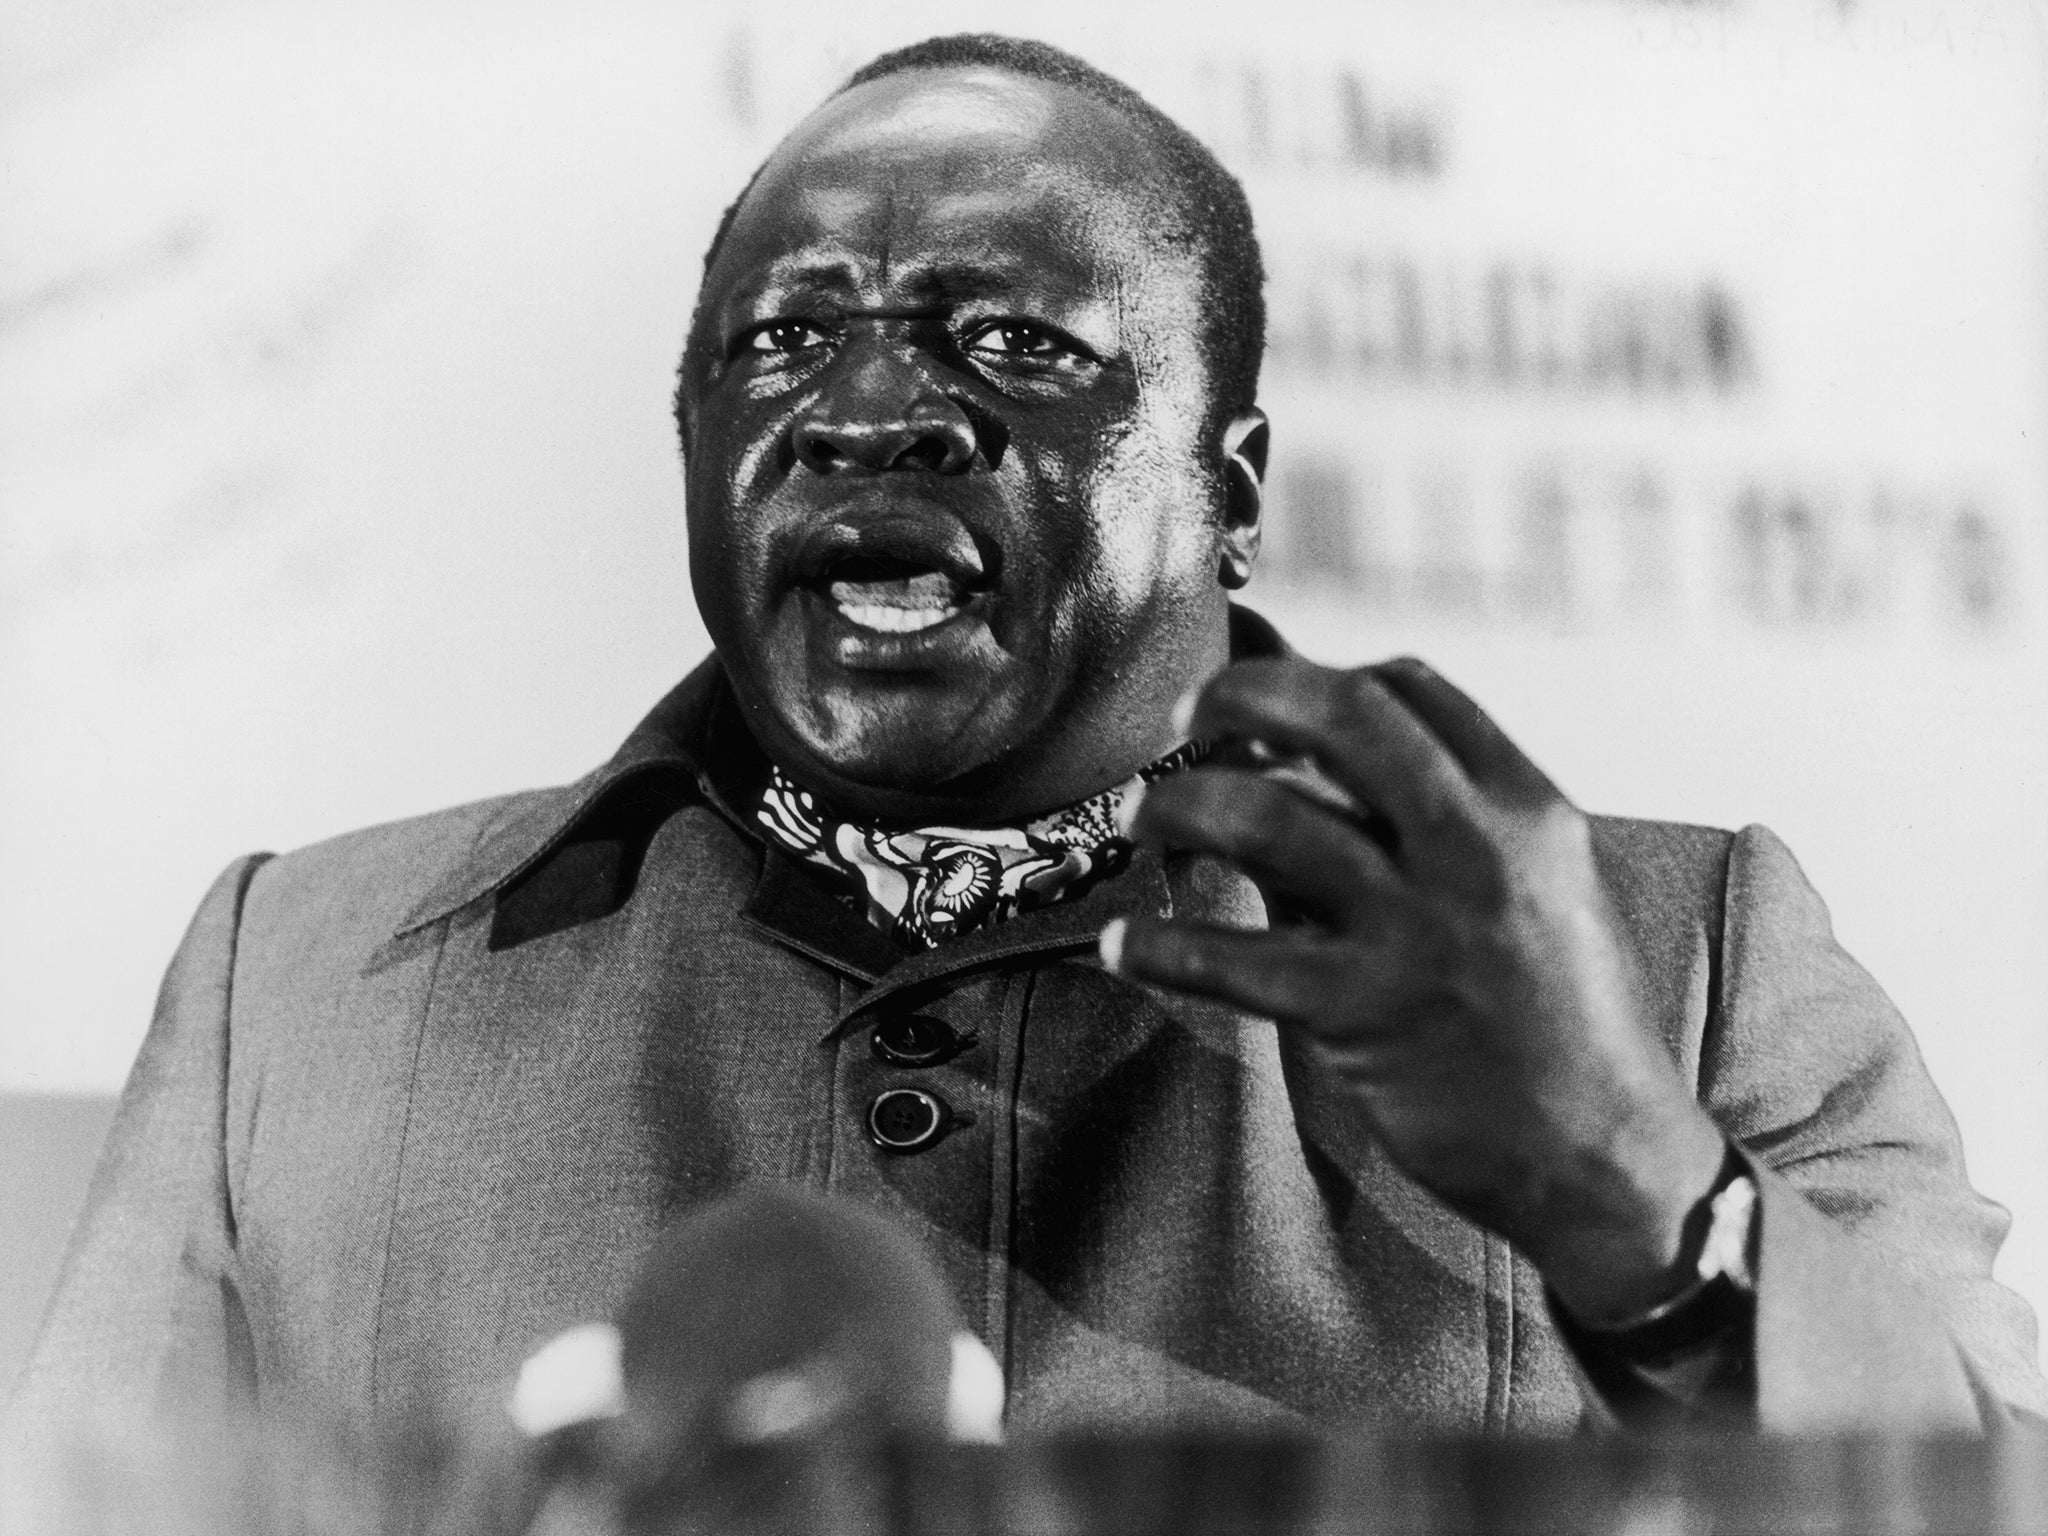 Ugandan president Idi Amin shortly before he was removed from power in 1979